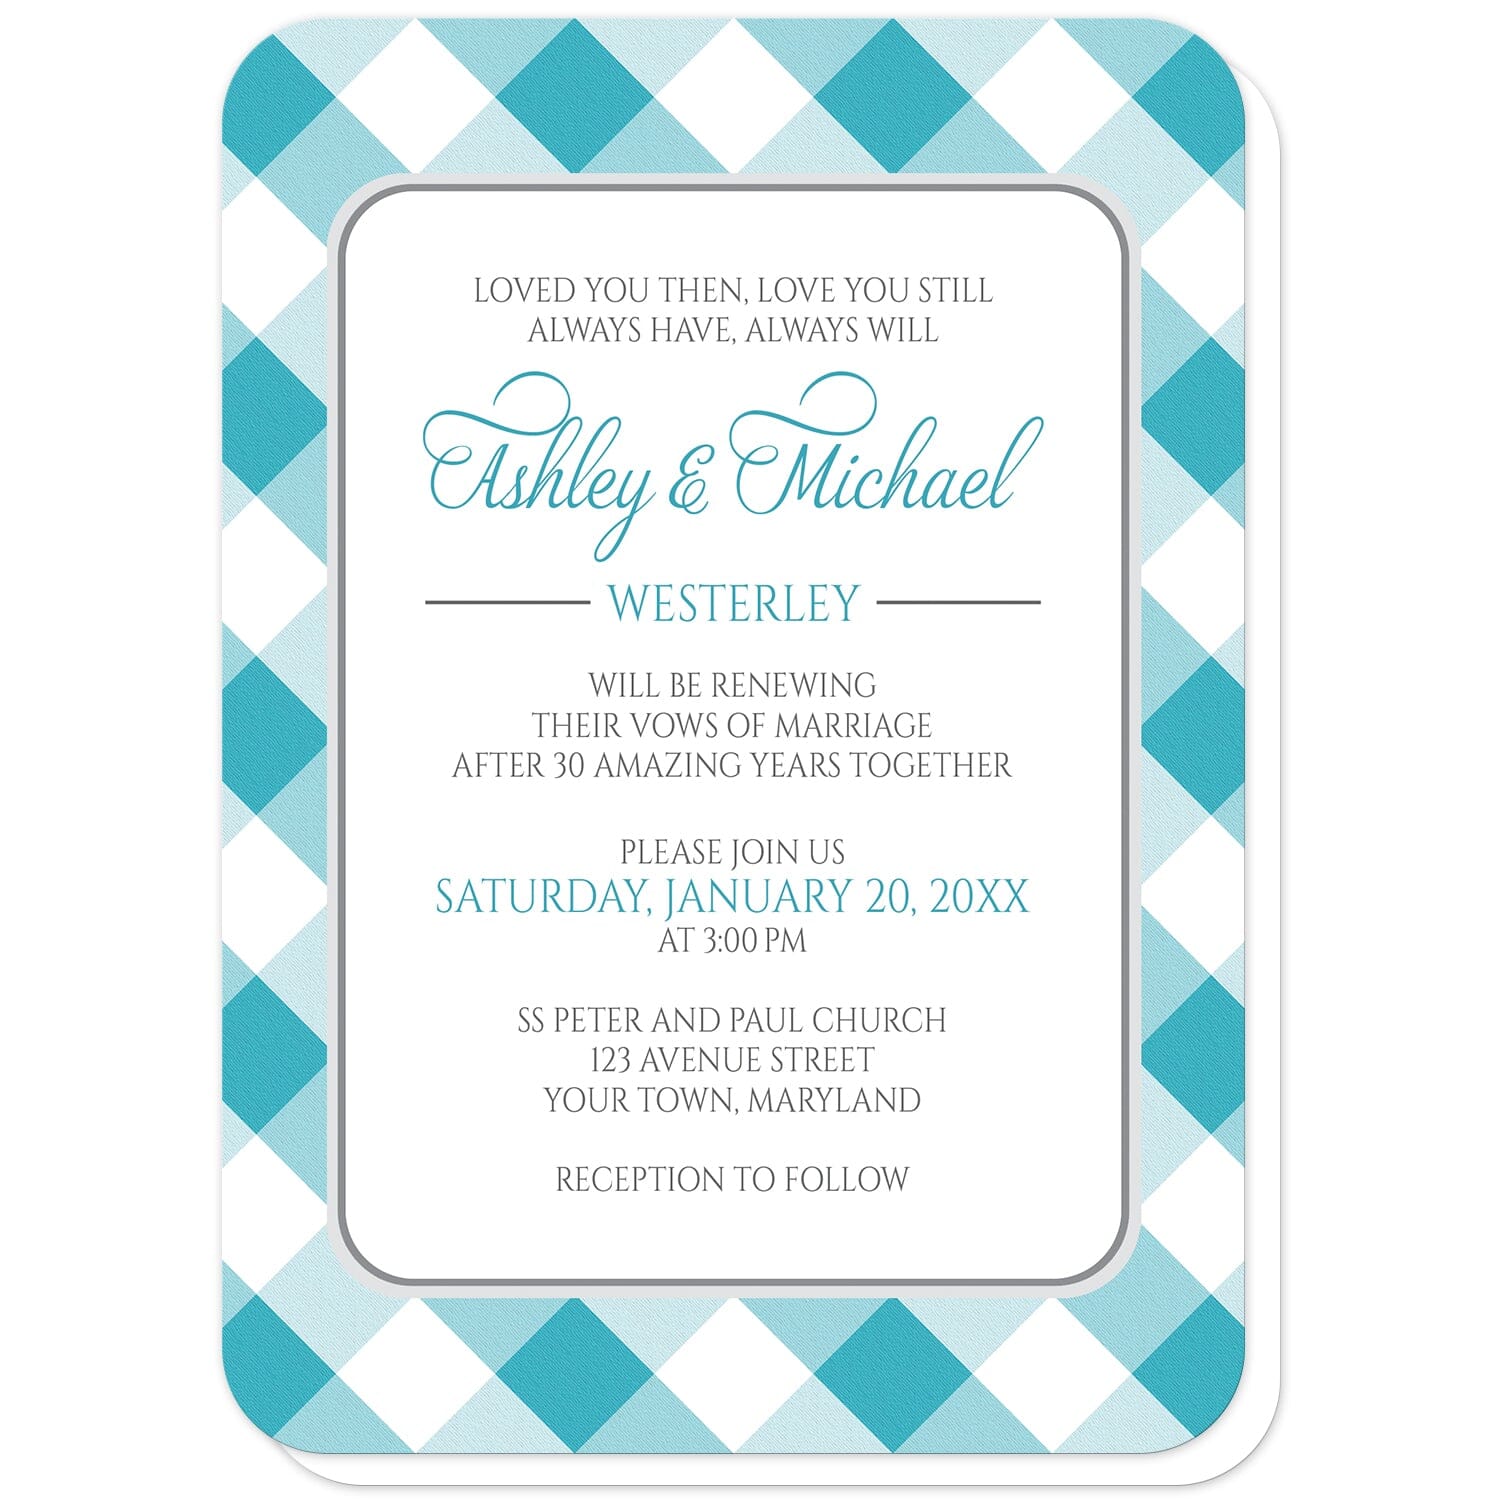 Turquoise Gingham Vow Renewal Invitations (with rounded corners) at Artistically Invited. Turquoise gingham vow renewal invitations with your personalized ceremony details custom printed in turquoise and gray inside a white rectangular area outlined in gray. The background design is a diagonal turquoise and white gingham pattern. 